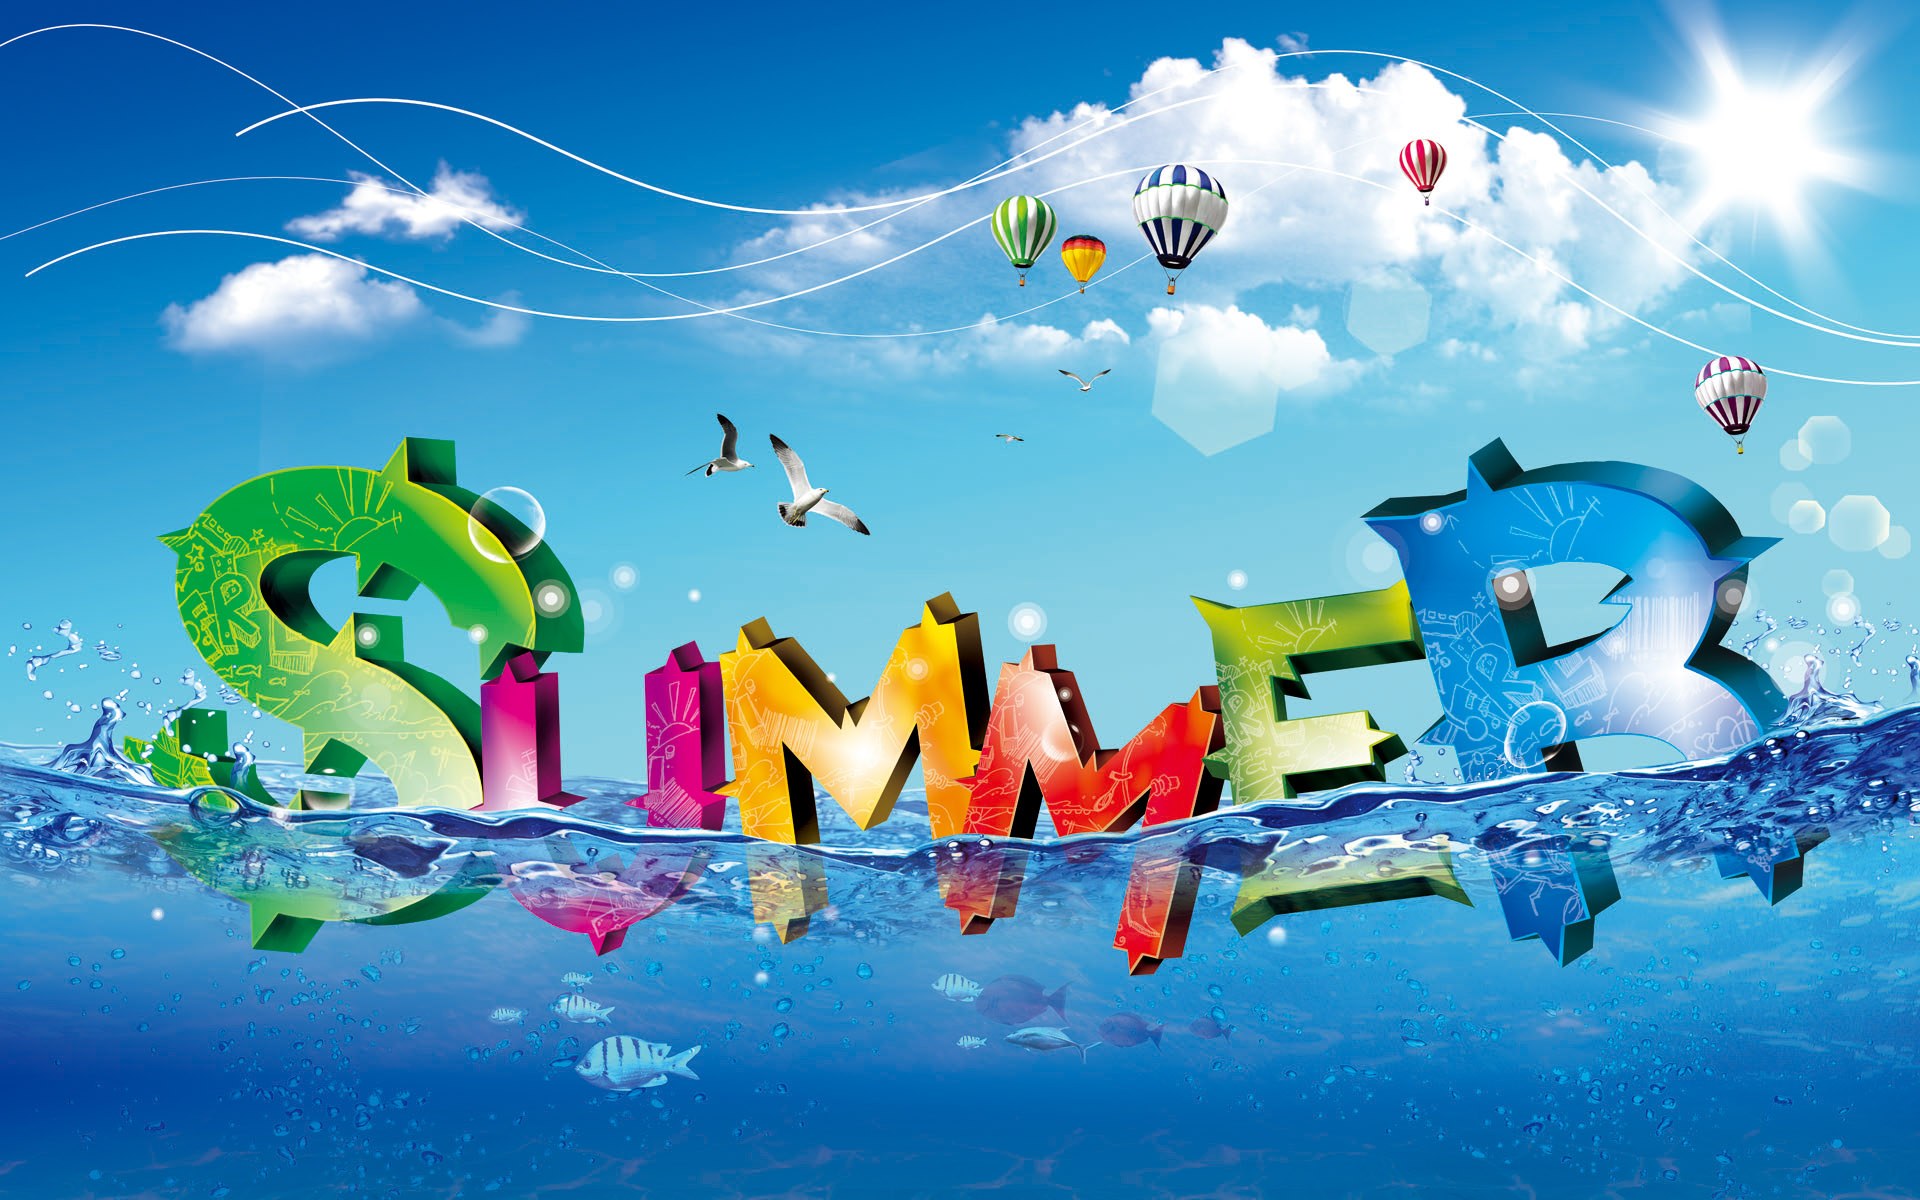 This Scenery Wallpaper Is A Typical Scene In Summer The Weather